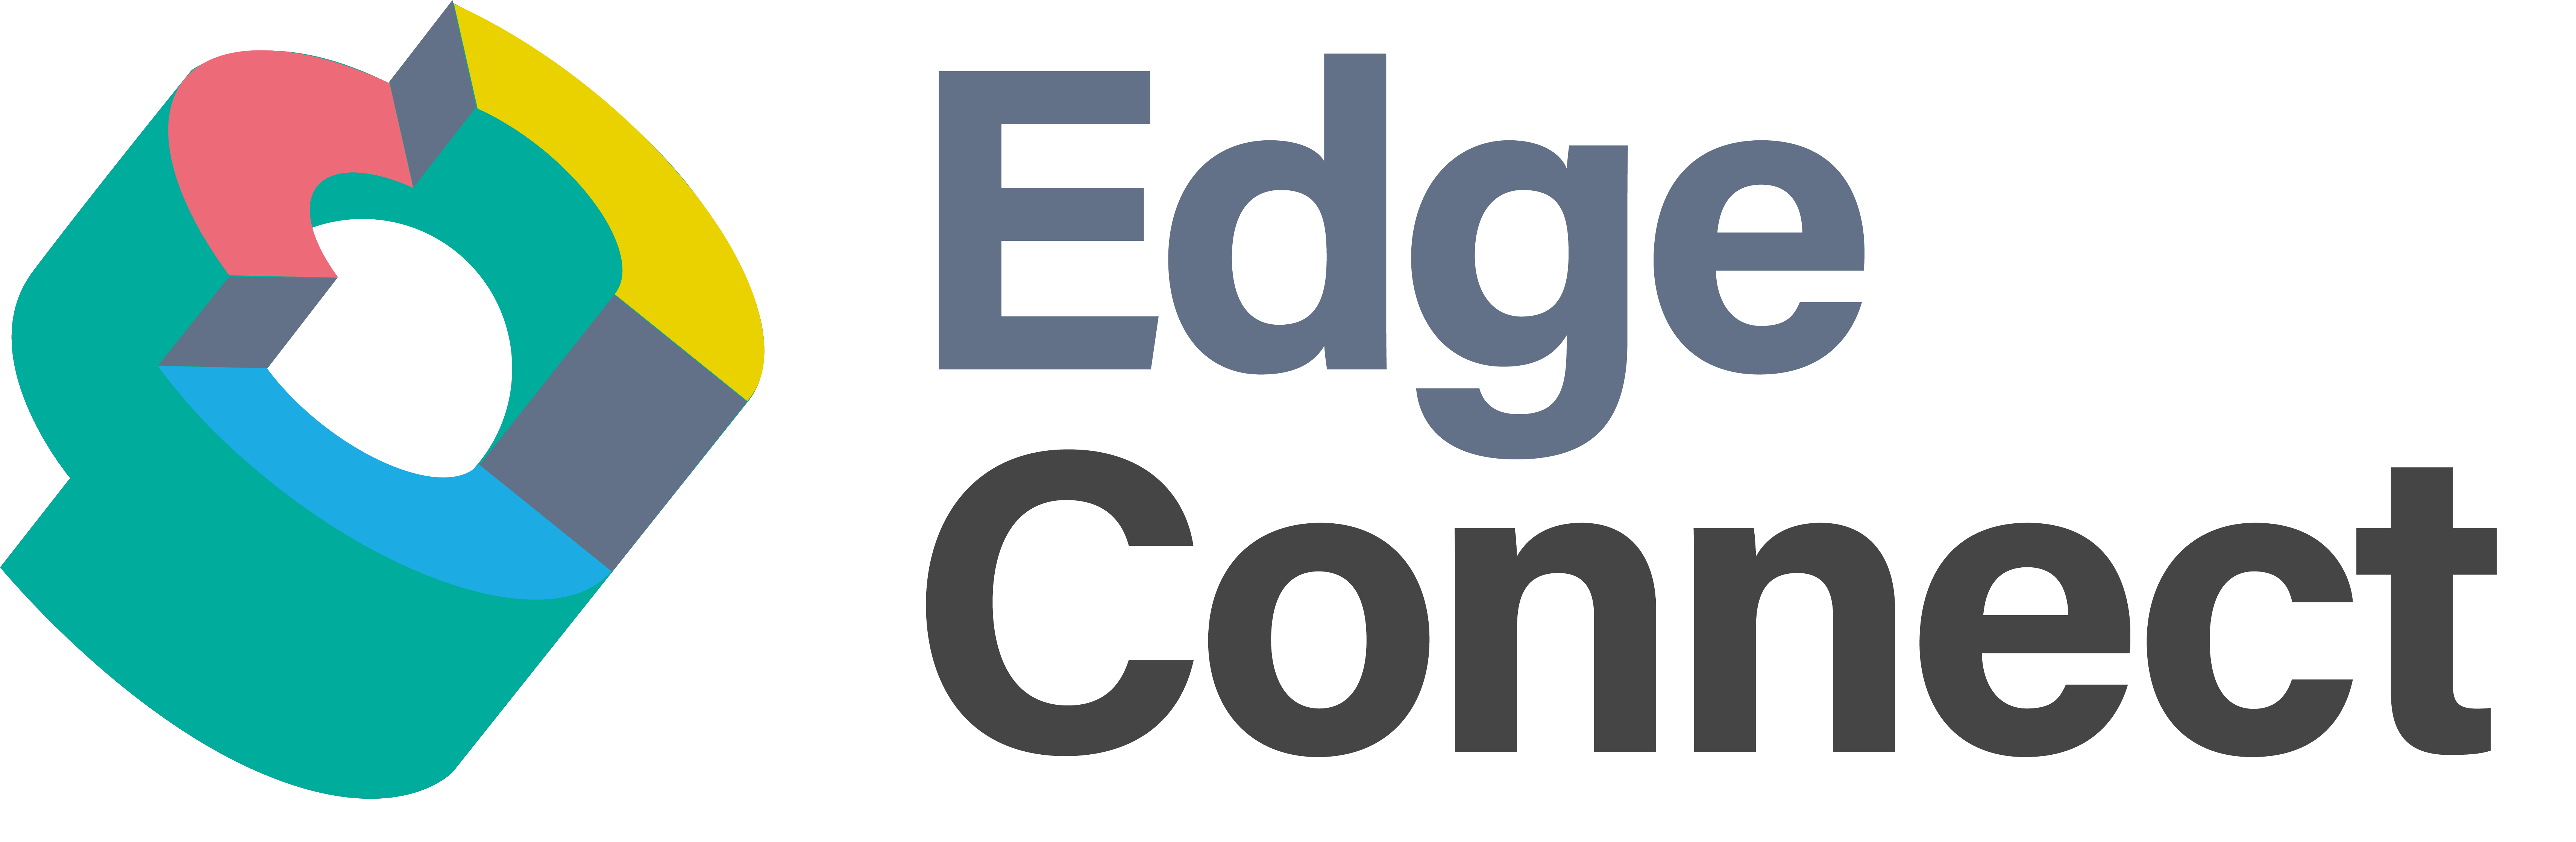 Edge Connect logo | IOTech Systems